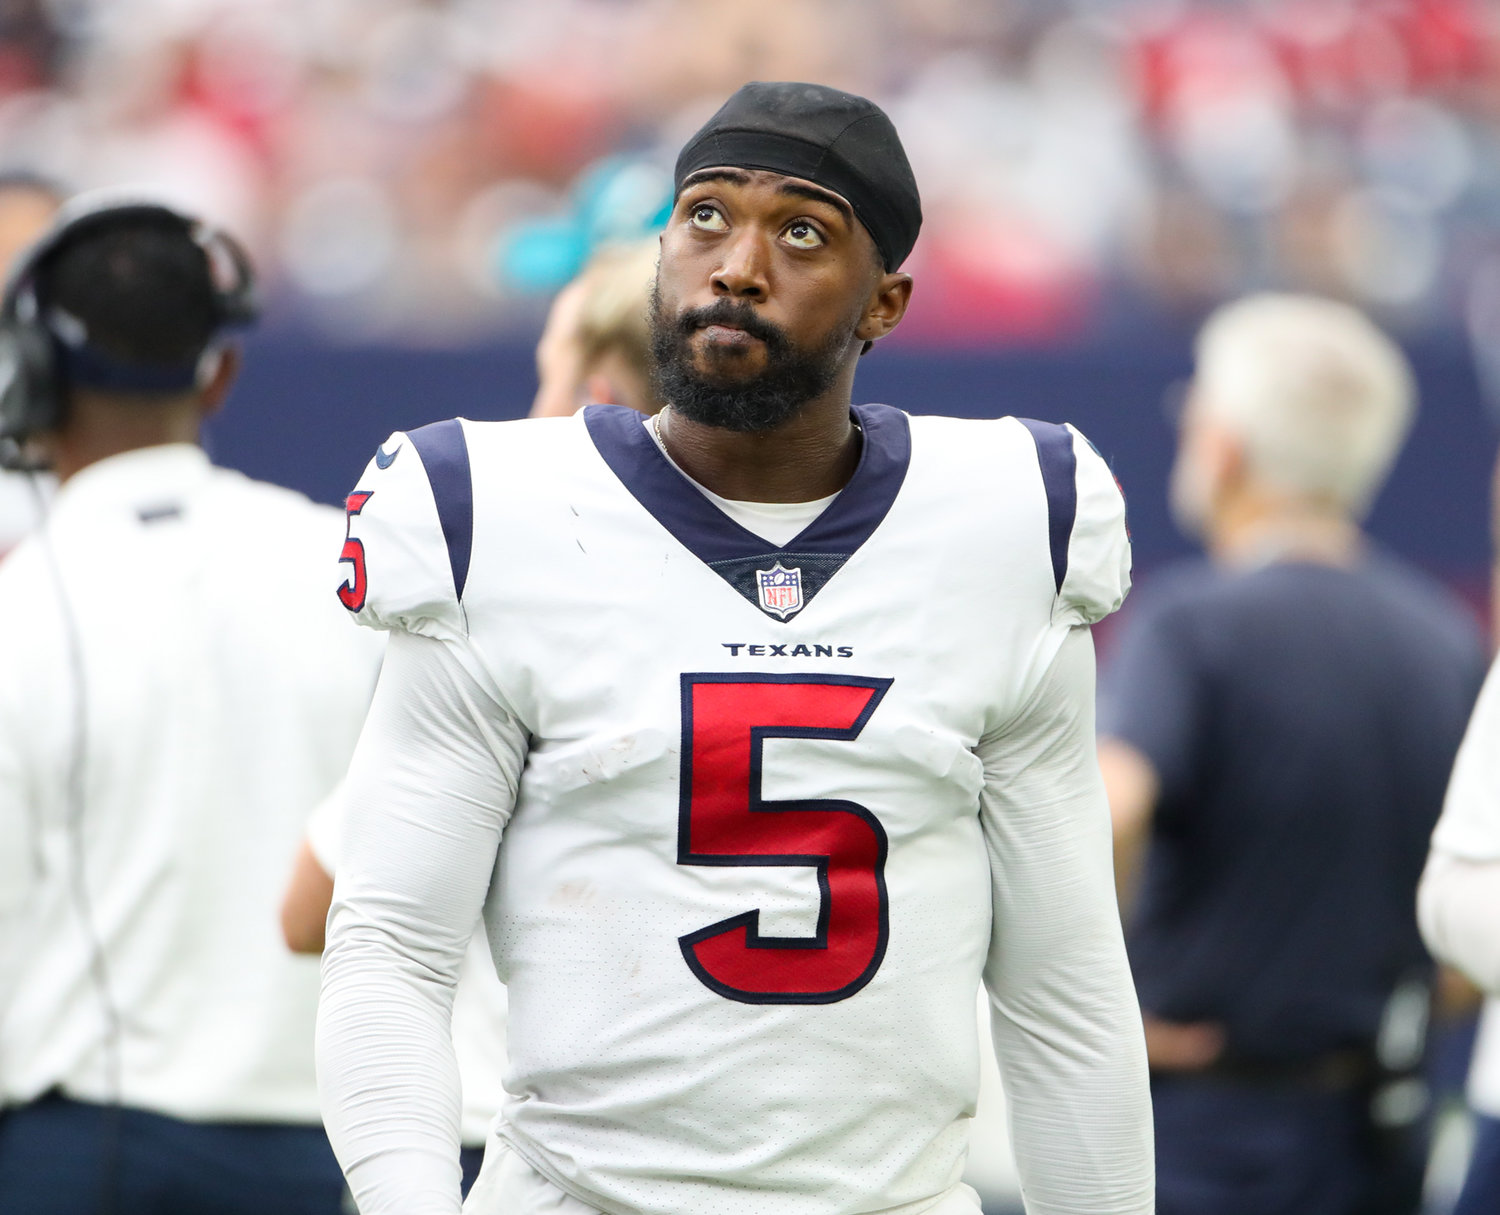 Houston Texans quarterback Tyrod Taylor (5) during the second half of an NFL game between the Houston Texans and the Jacksonville Jaguars on September 12, 2021 in Houston, Texas.